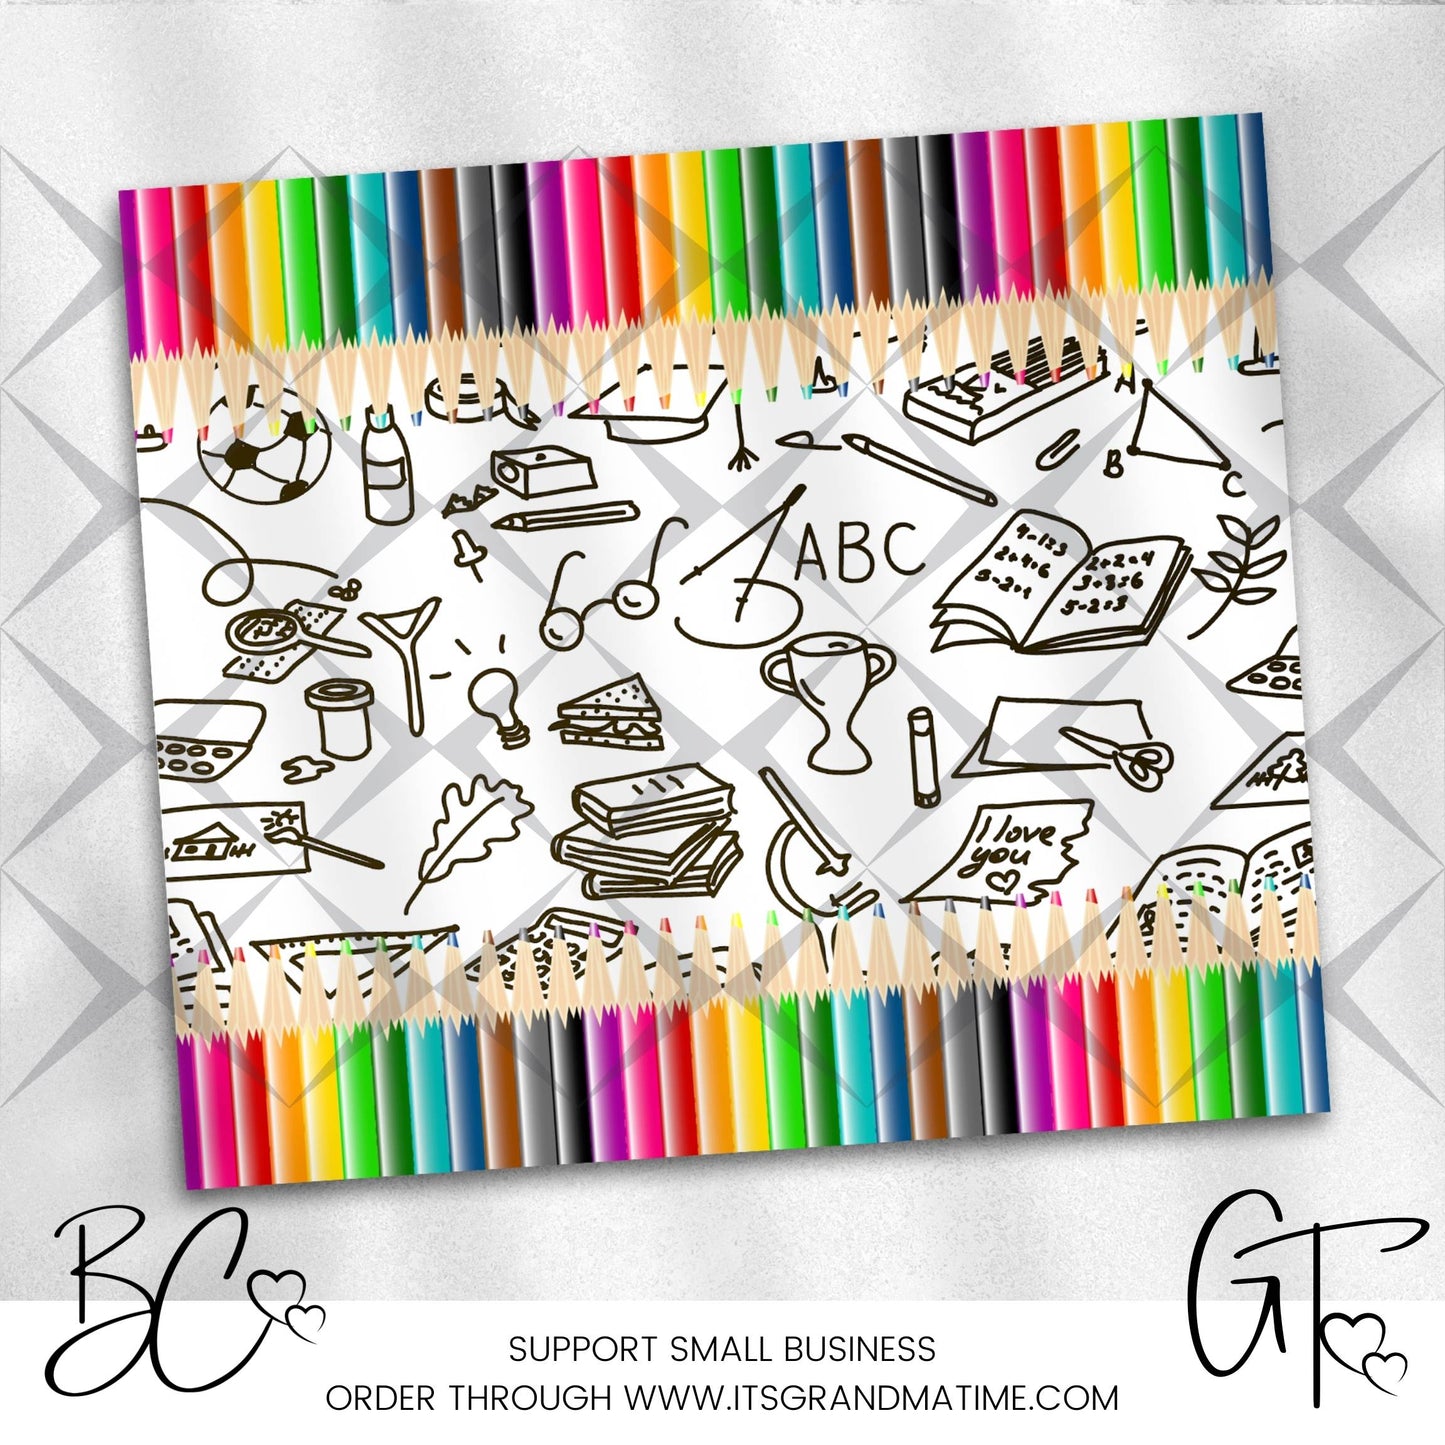 SUB680 Colored Pencils with Black and White School Images School | Teacher Tumbler Sublimation Transfer